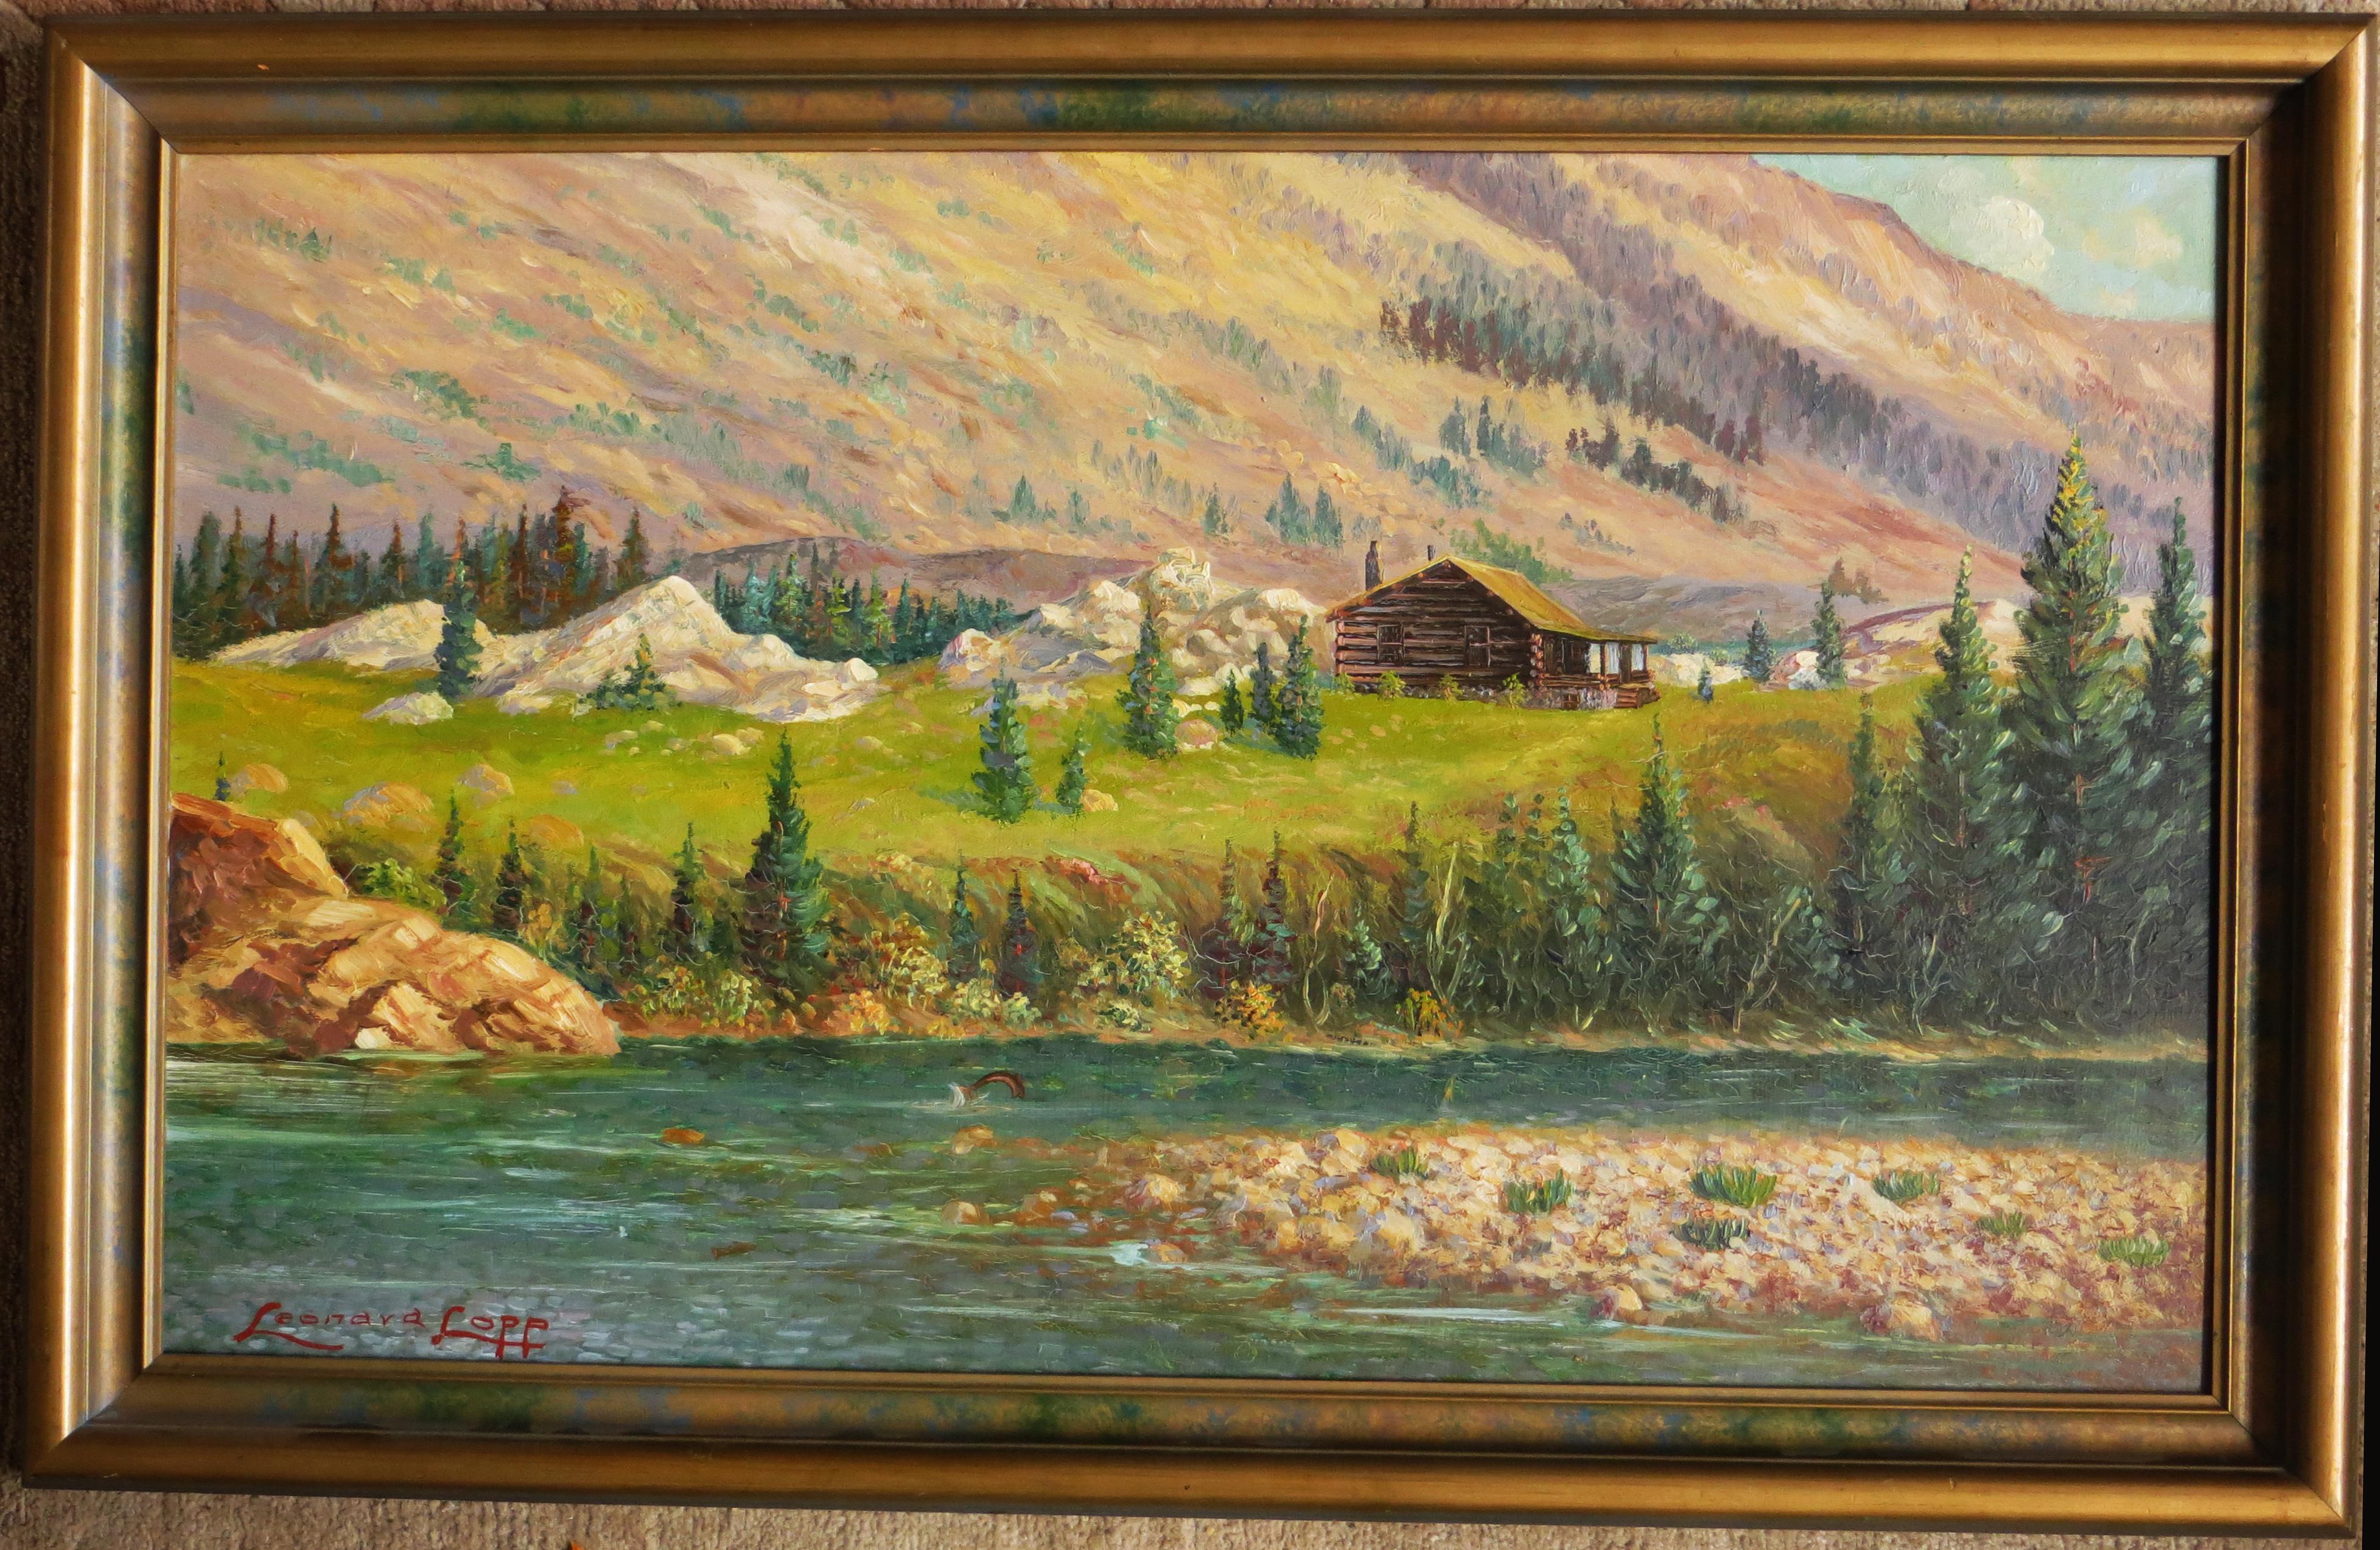 Vintage Western Mountain Scene by noted Montana Artist - Painting by Harry Leonard Lopp